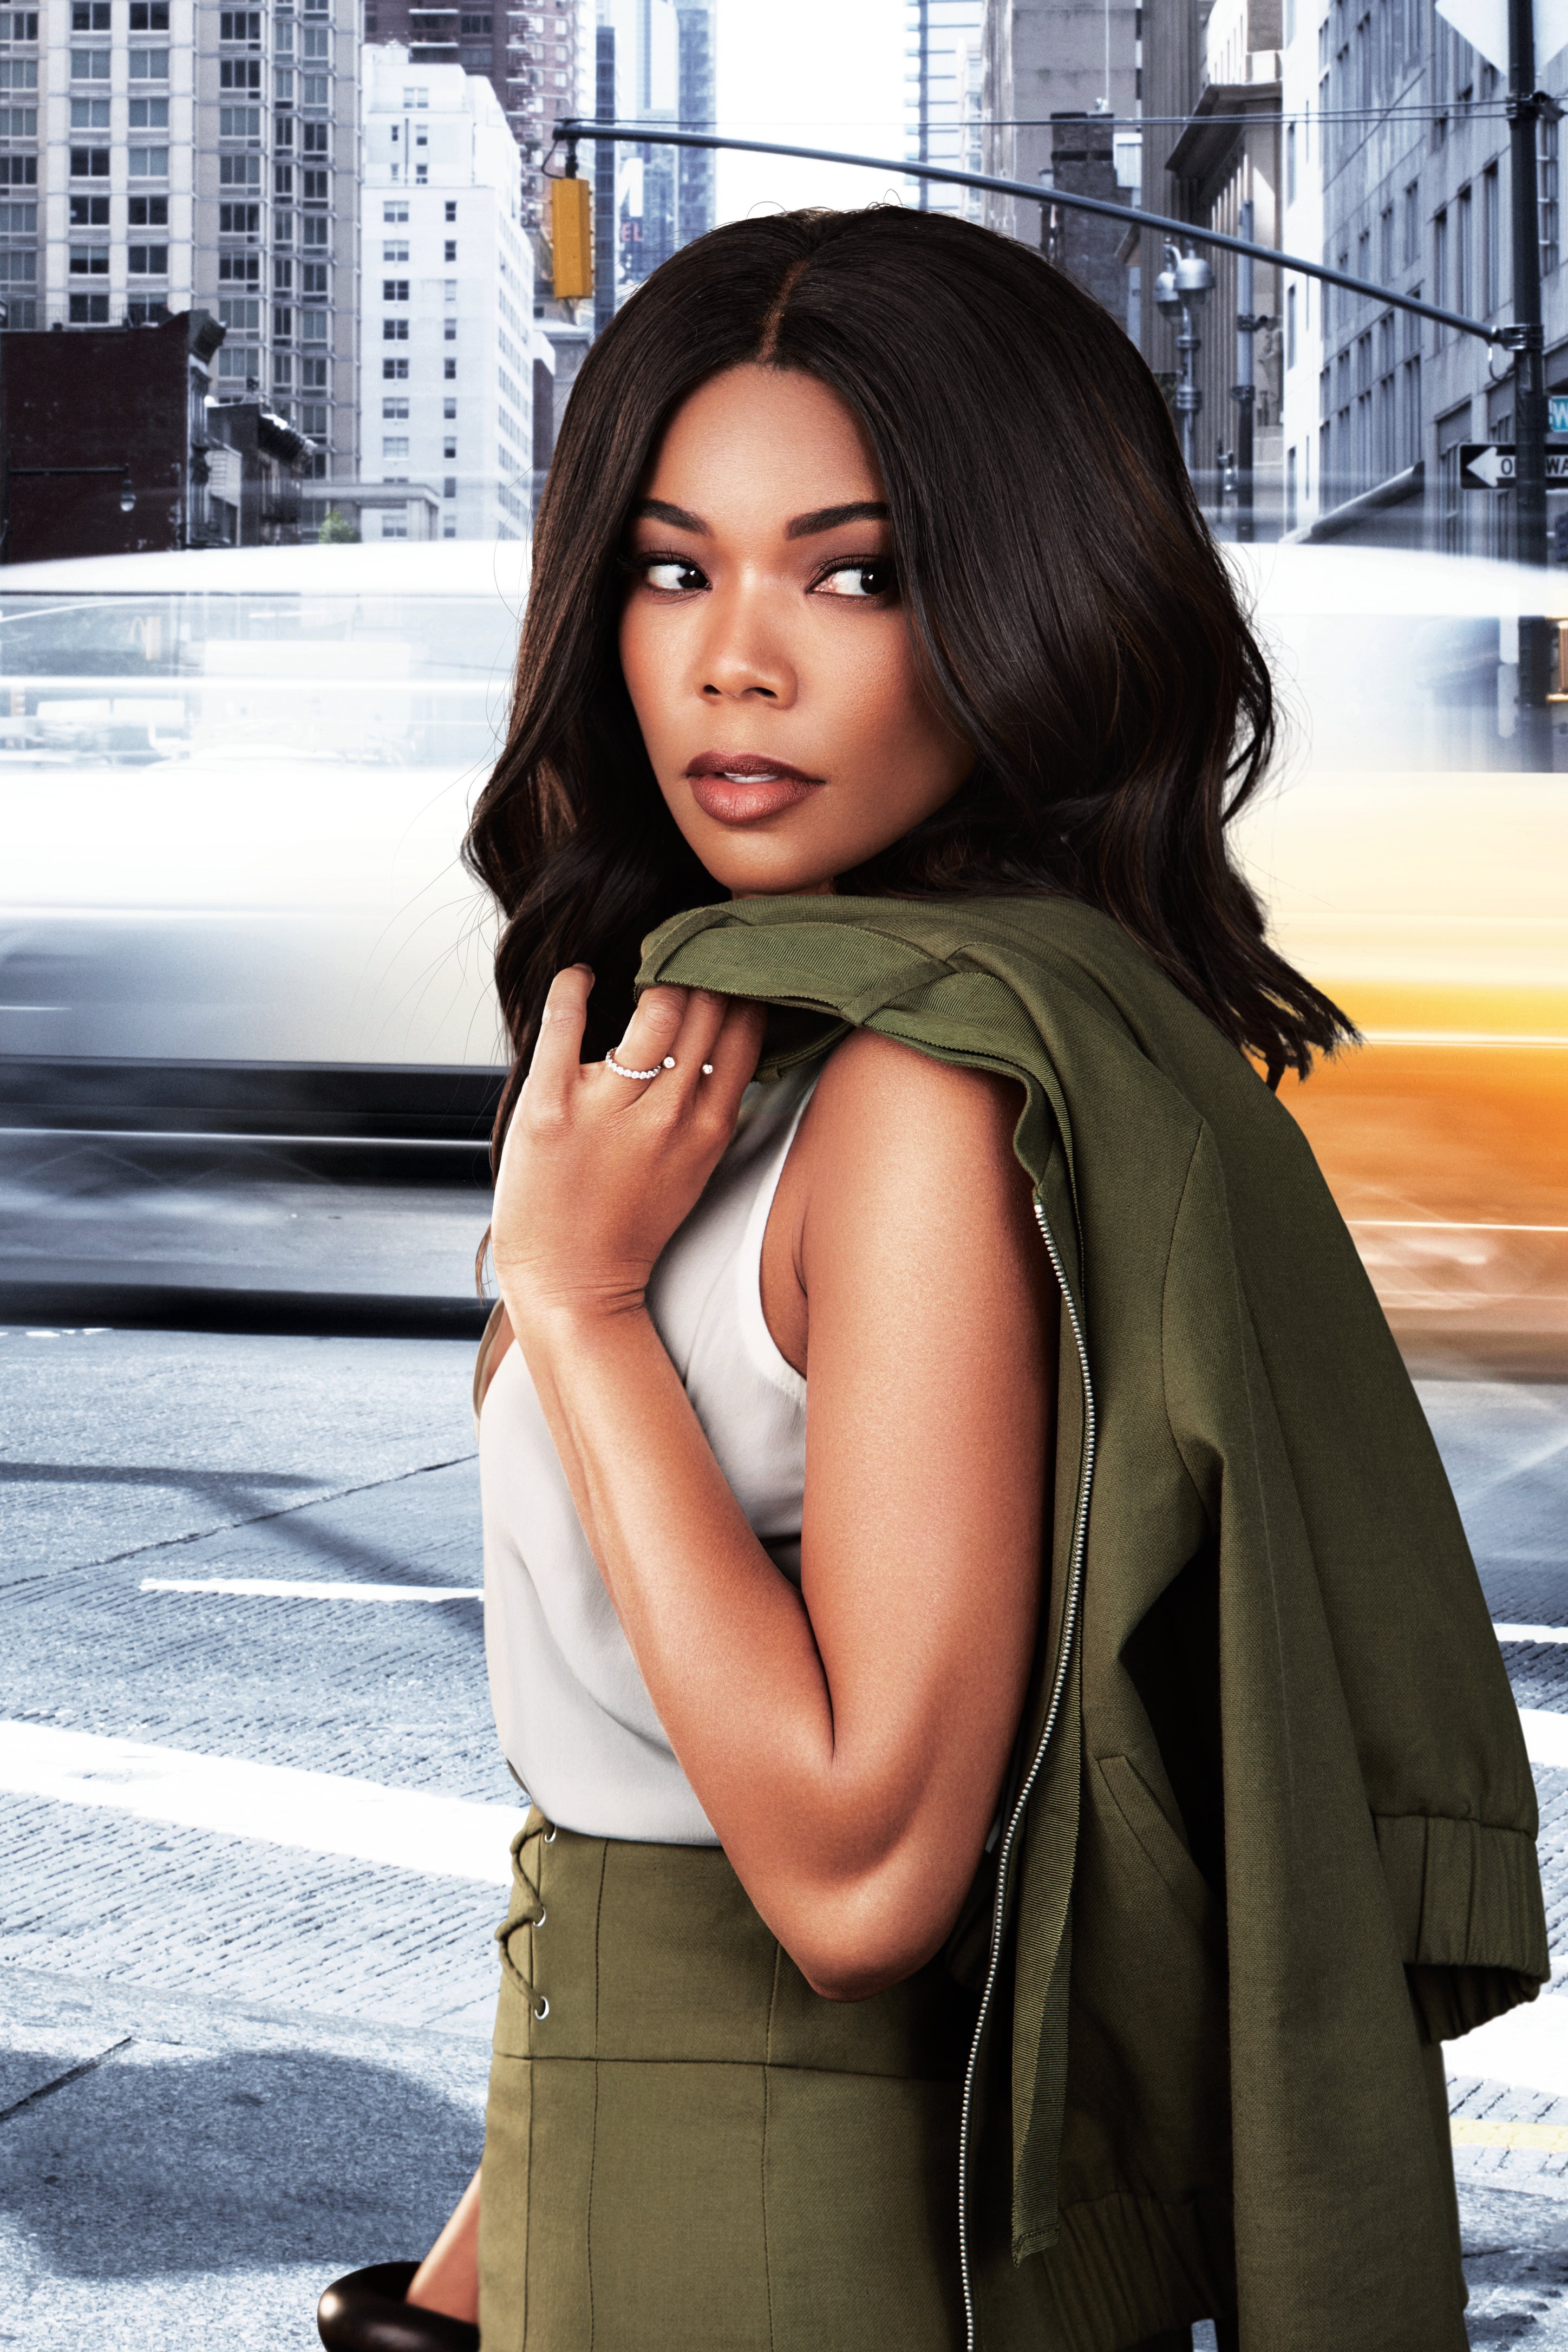 Gabrielle Union's New Collaboration With New York & Company is Work Wardrobe Goals